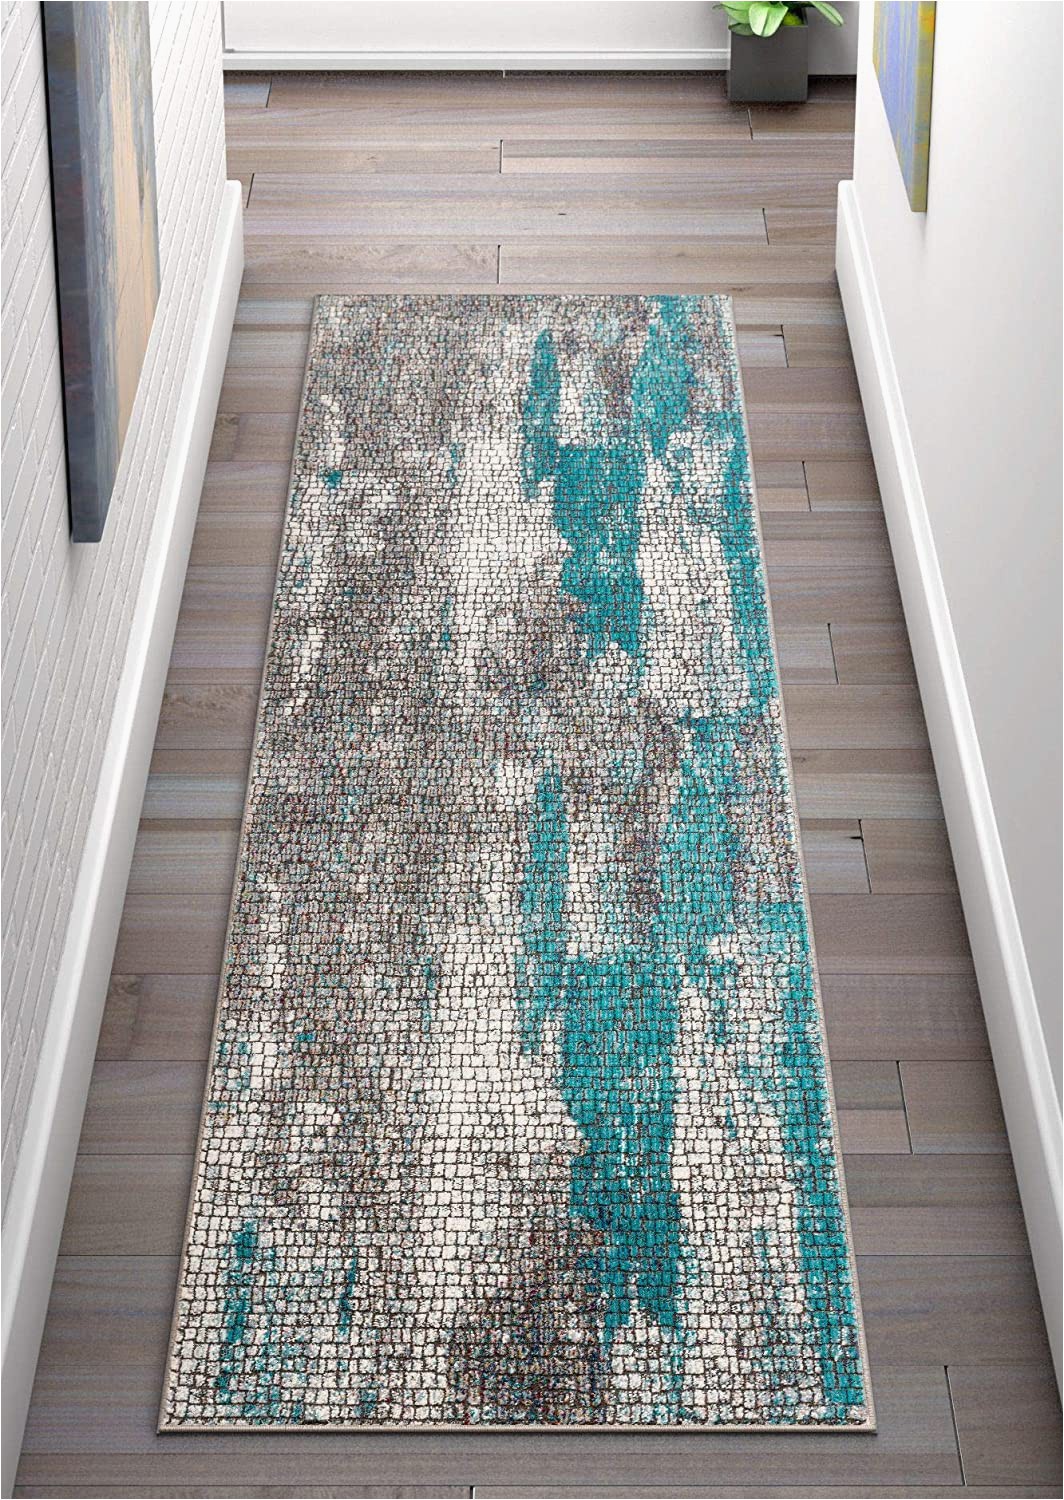 Gray and Blue Runner Rug Well Woven Carlo Blue Abstract Geometric Runner Rug 2×7 2 X 7 3"